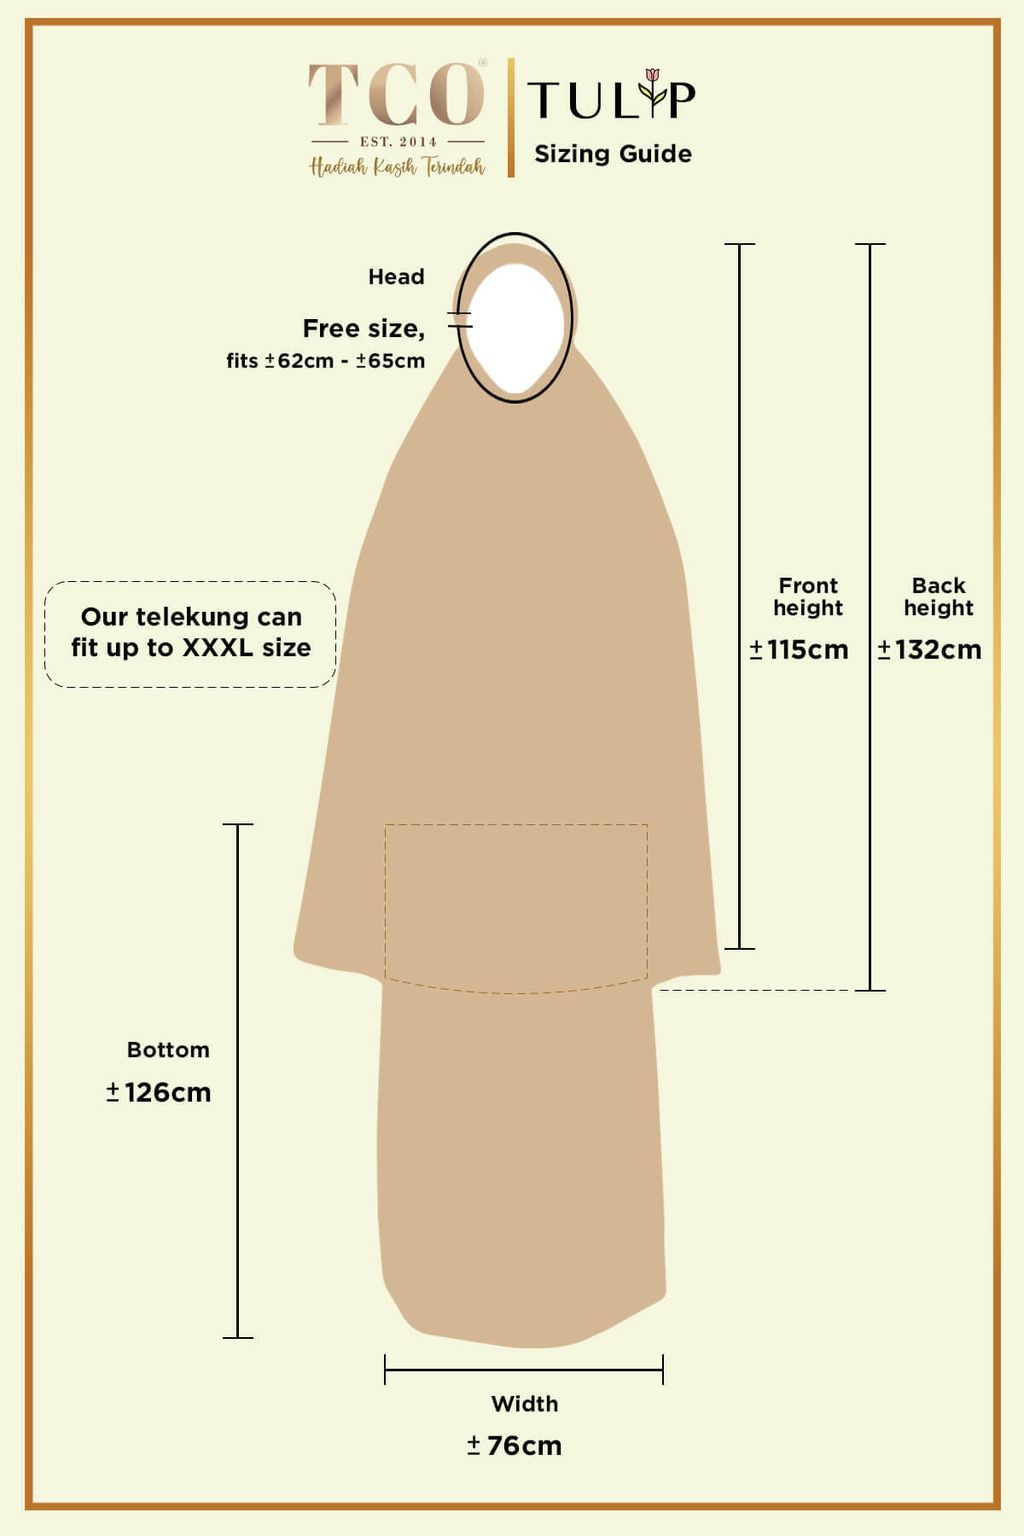 Telekung Tulip by TCO - Sizing guide